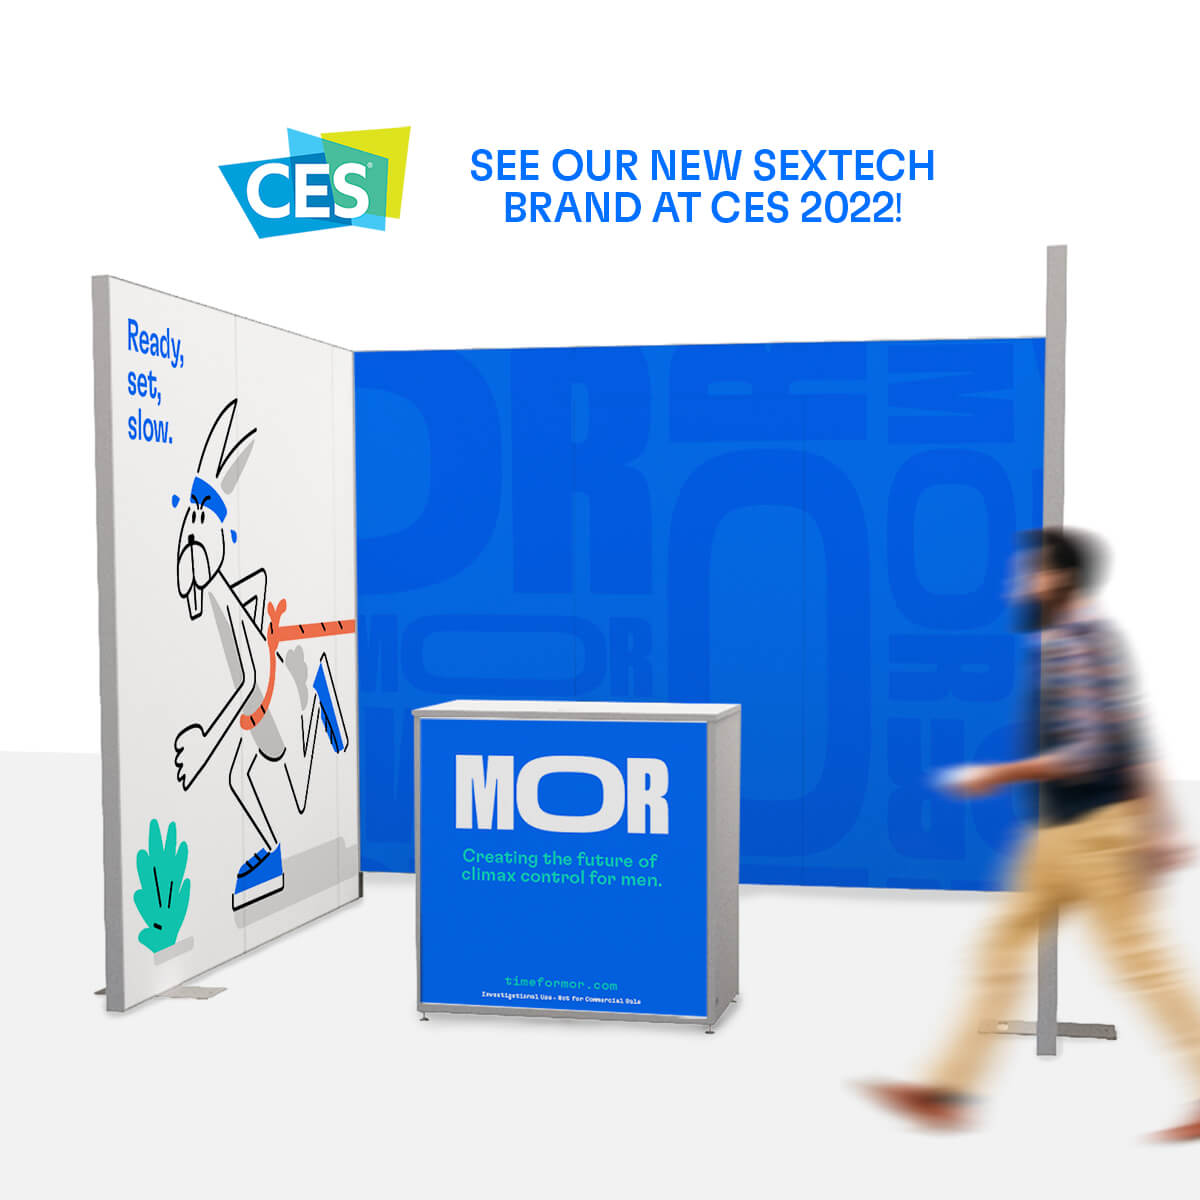 Morari Medical will be at CES January 5 – 8 to unveil its 'Mor' device it says is creating the future of climax control for men.